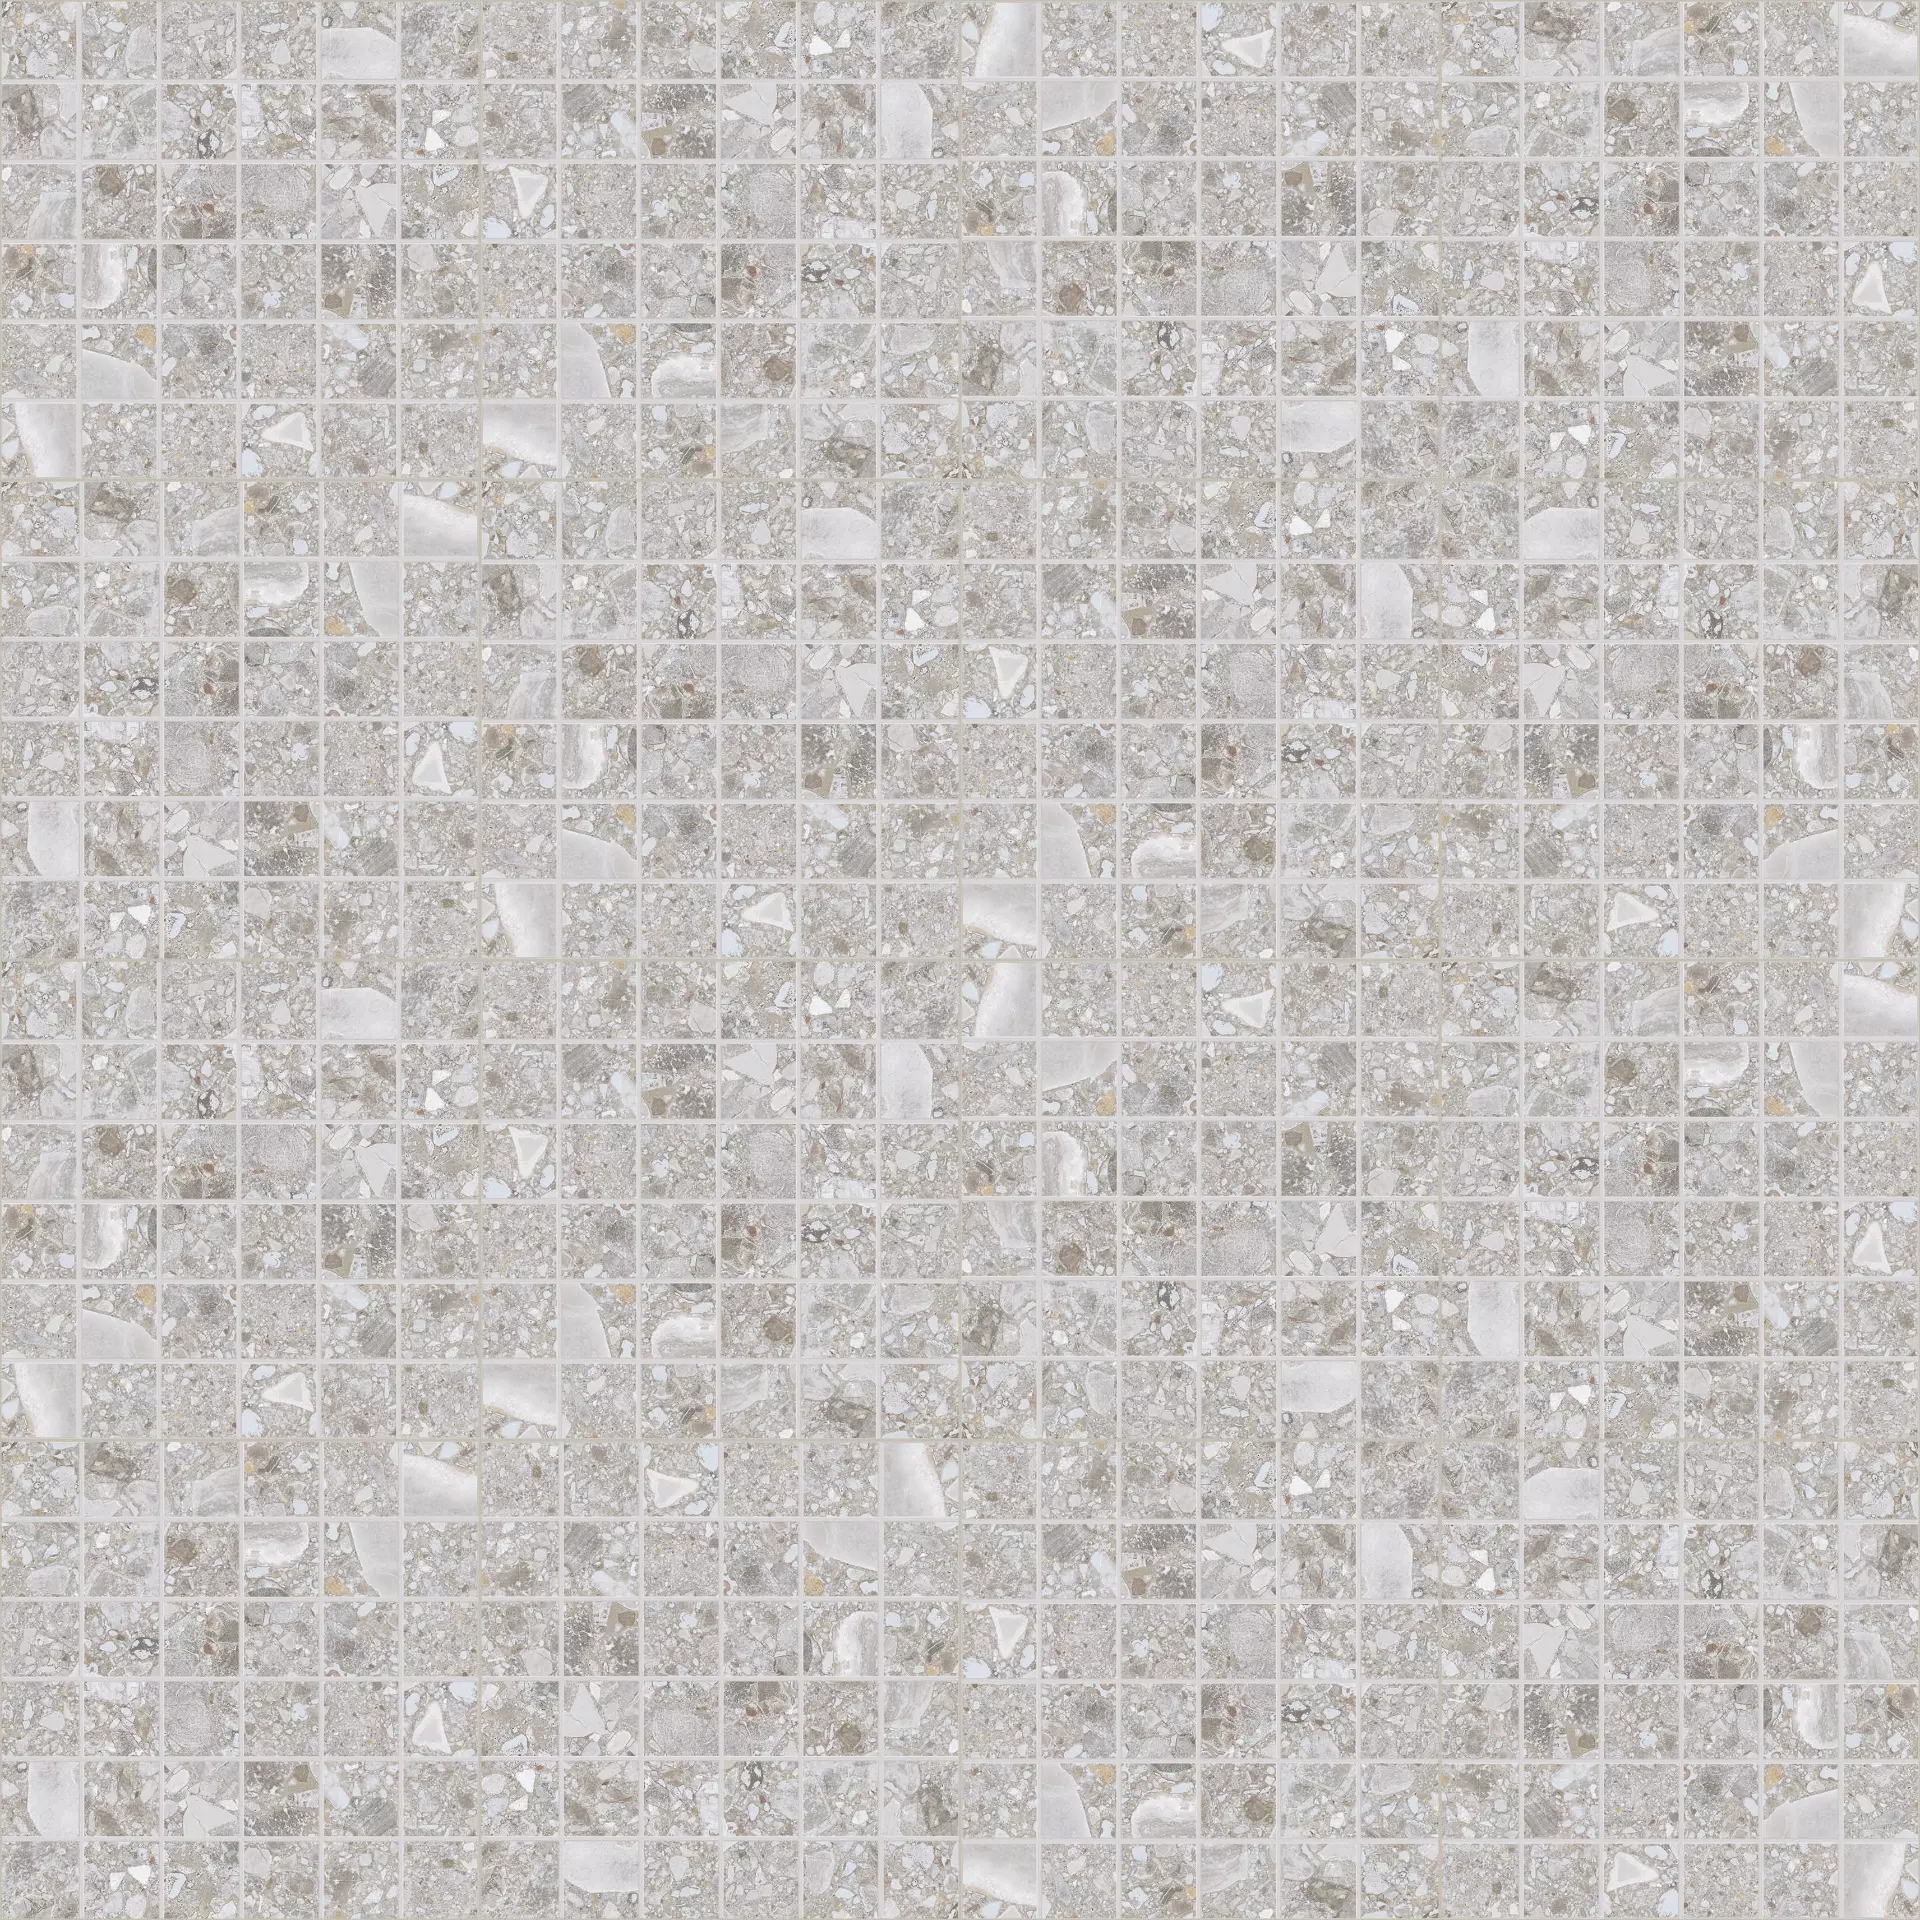 Keope Omnia Ceppo Grey Spazzolato Mosaic T5 474B4D34 30x30cm rectified 9mm